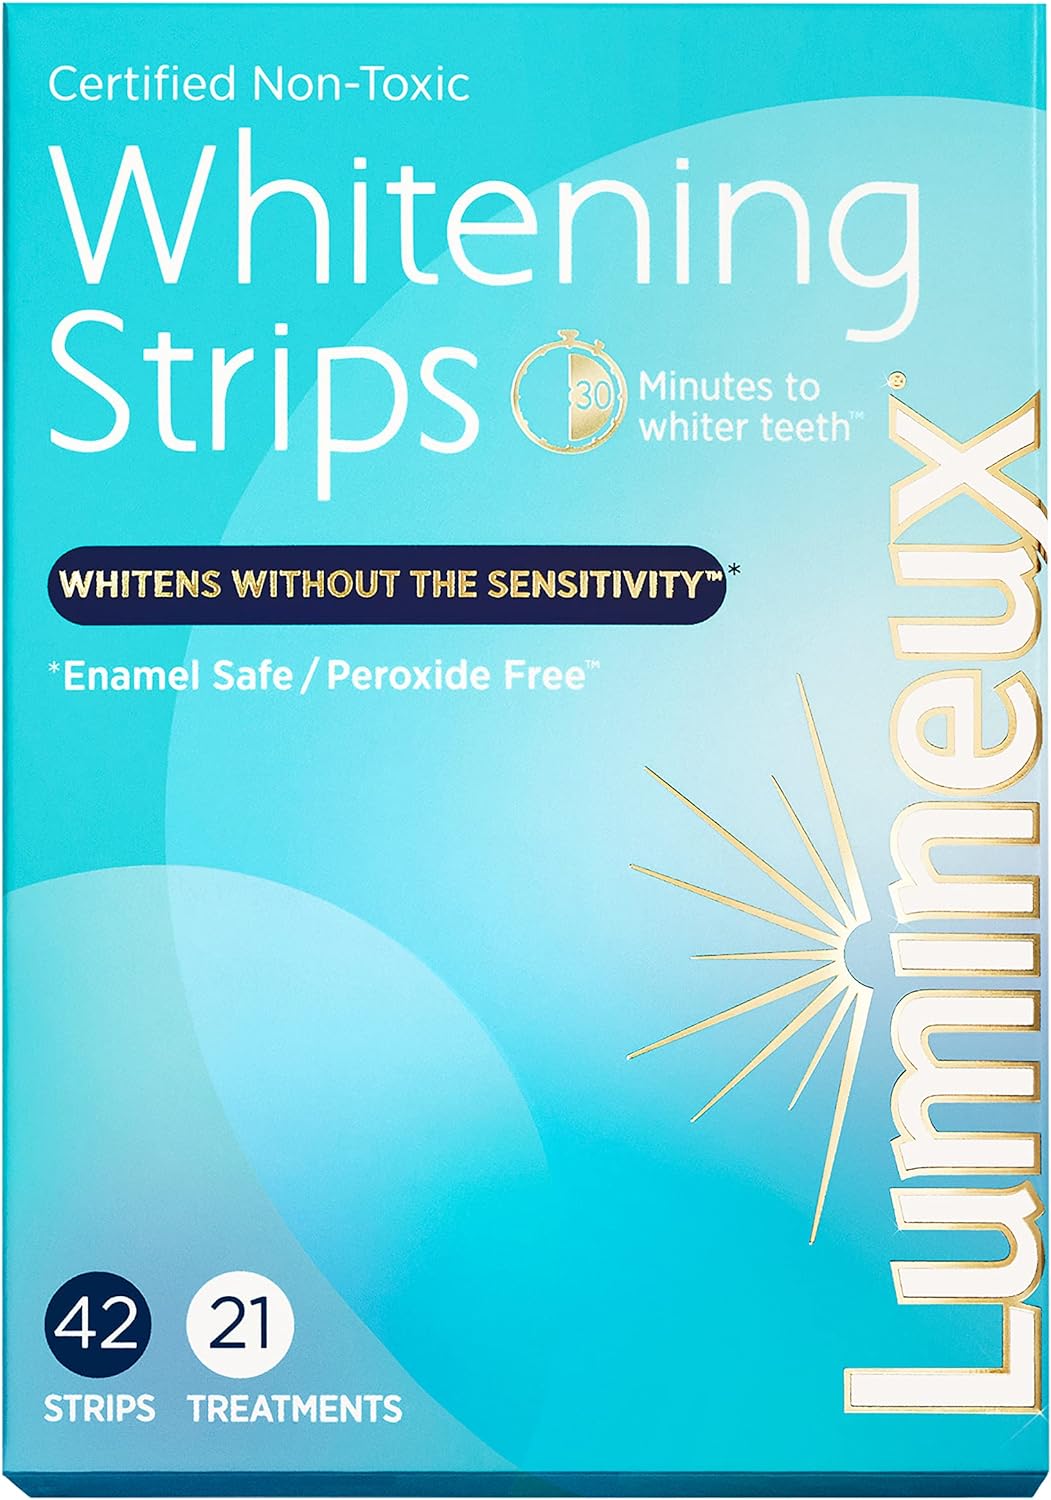 Uniites™, Lumineux Teeth Whitening Strips 21 Treatments - Enamel Safe for Whiter Teeth - Whitening Without the Sensitivity - Dentist Formulated and Certified Non-Toxic - Sensitivity Free, $45.91